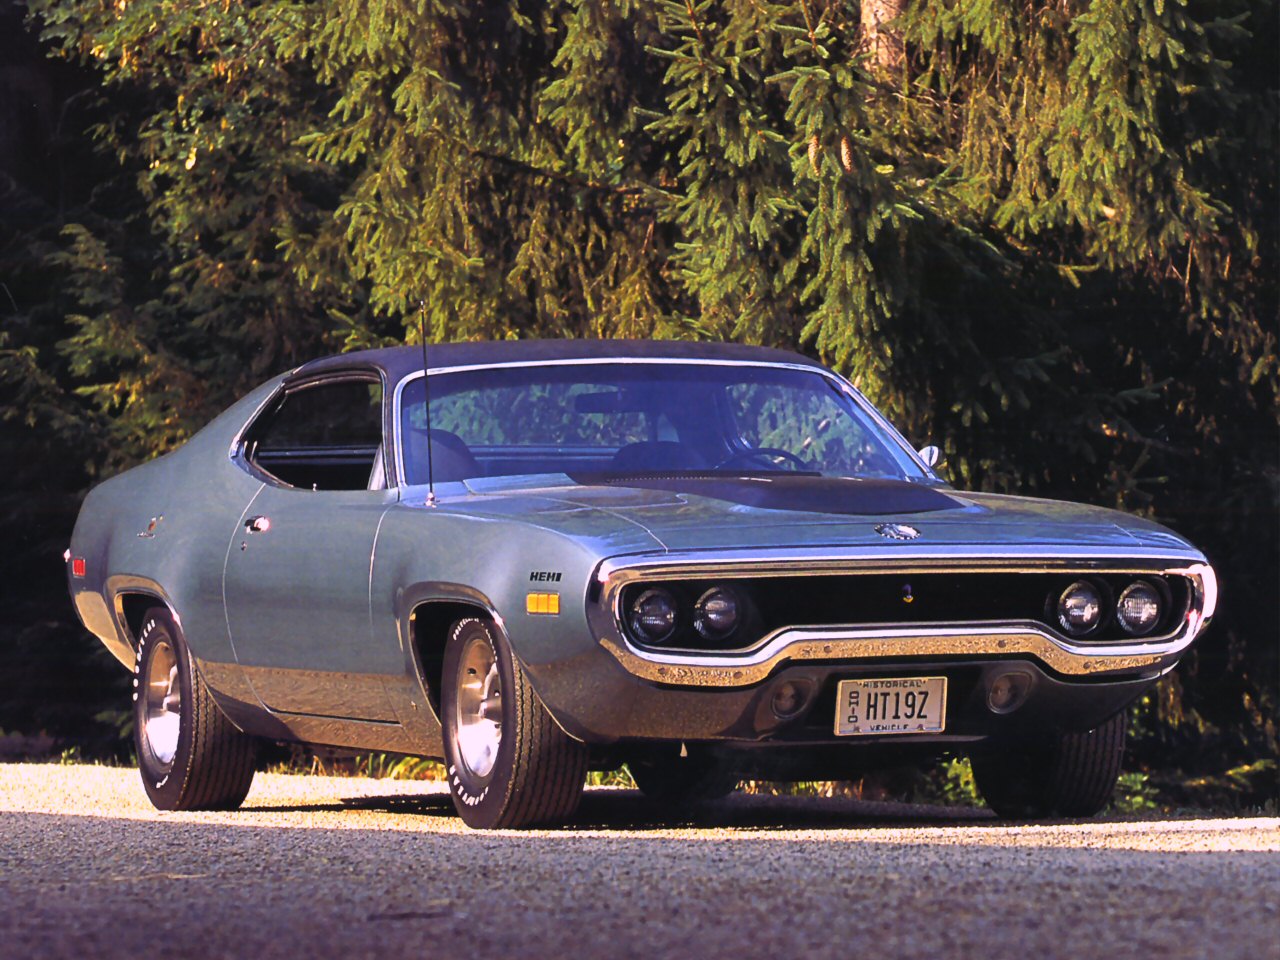 1971 Plymouth Road Runner Pics, Vehicles Collection - Old Equus Bass 770 - HD Wallpaper 